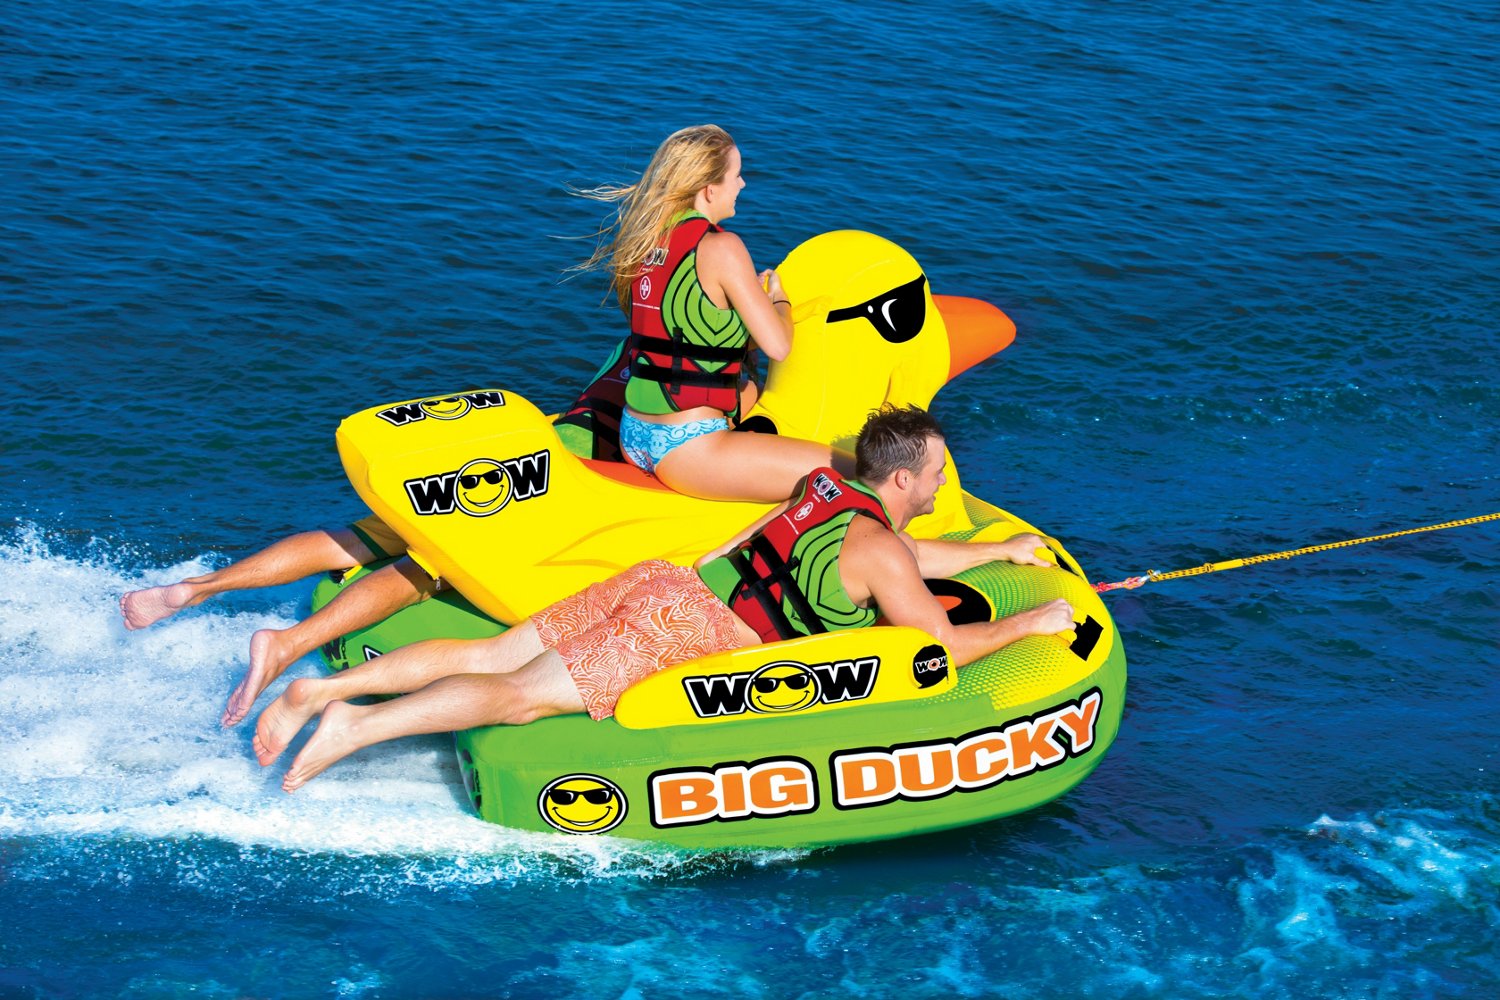 WOW Watersports Big Ducky 3Person Inflatable Towable Tube Academy